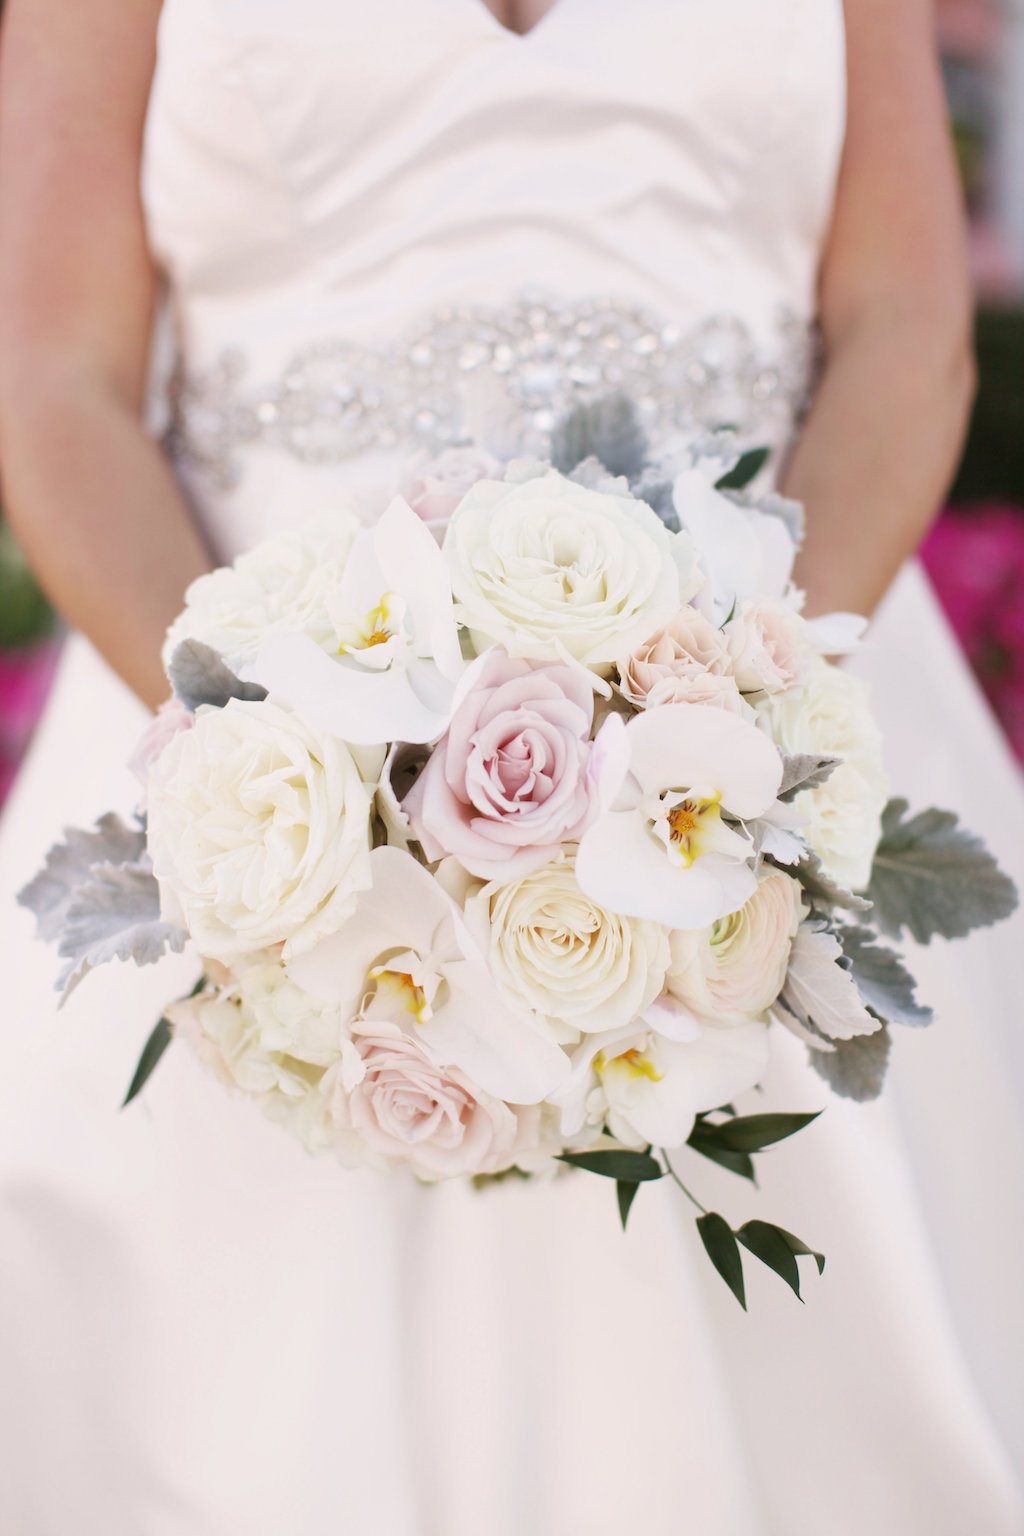 White Orchid, Cream and Blush Rose and Greenery Wedding Bouquet